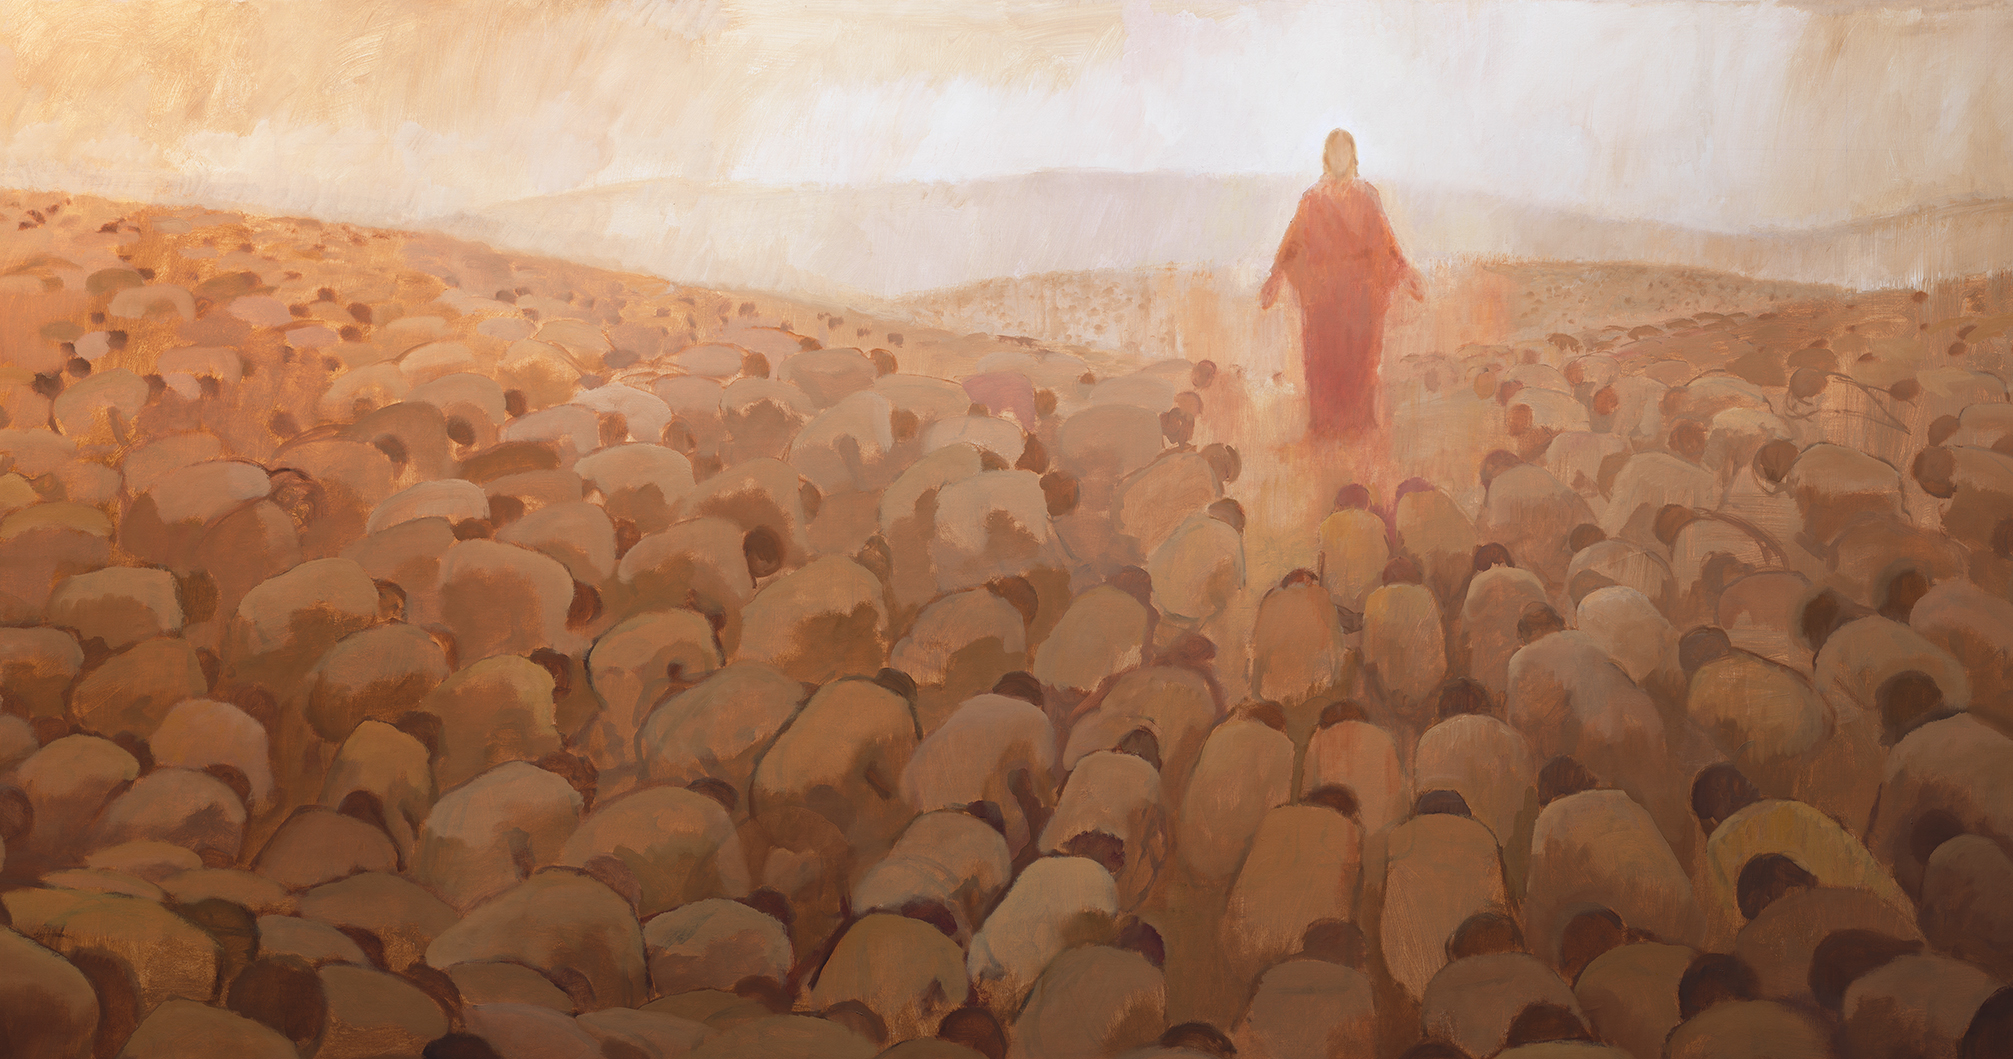 Image of Christ in Red surrounded by multitudes of kneeling people.